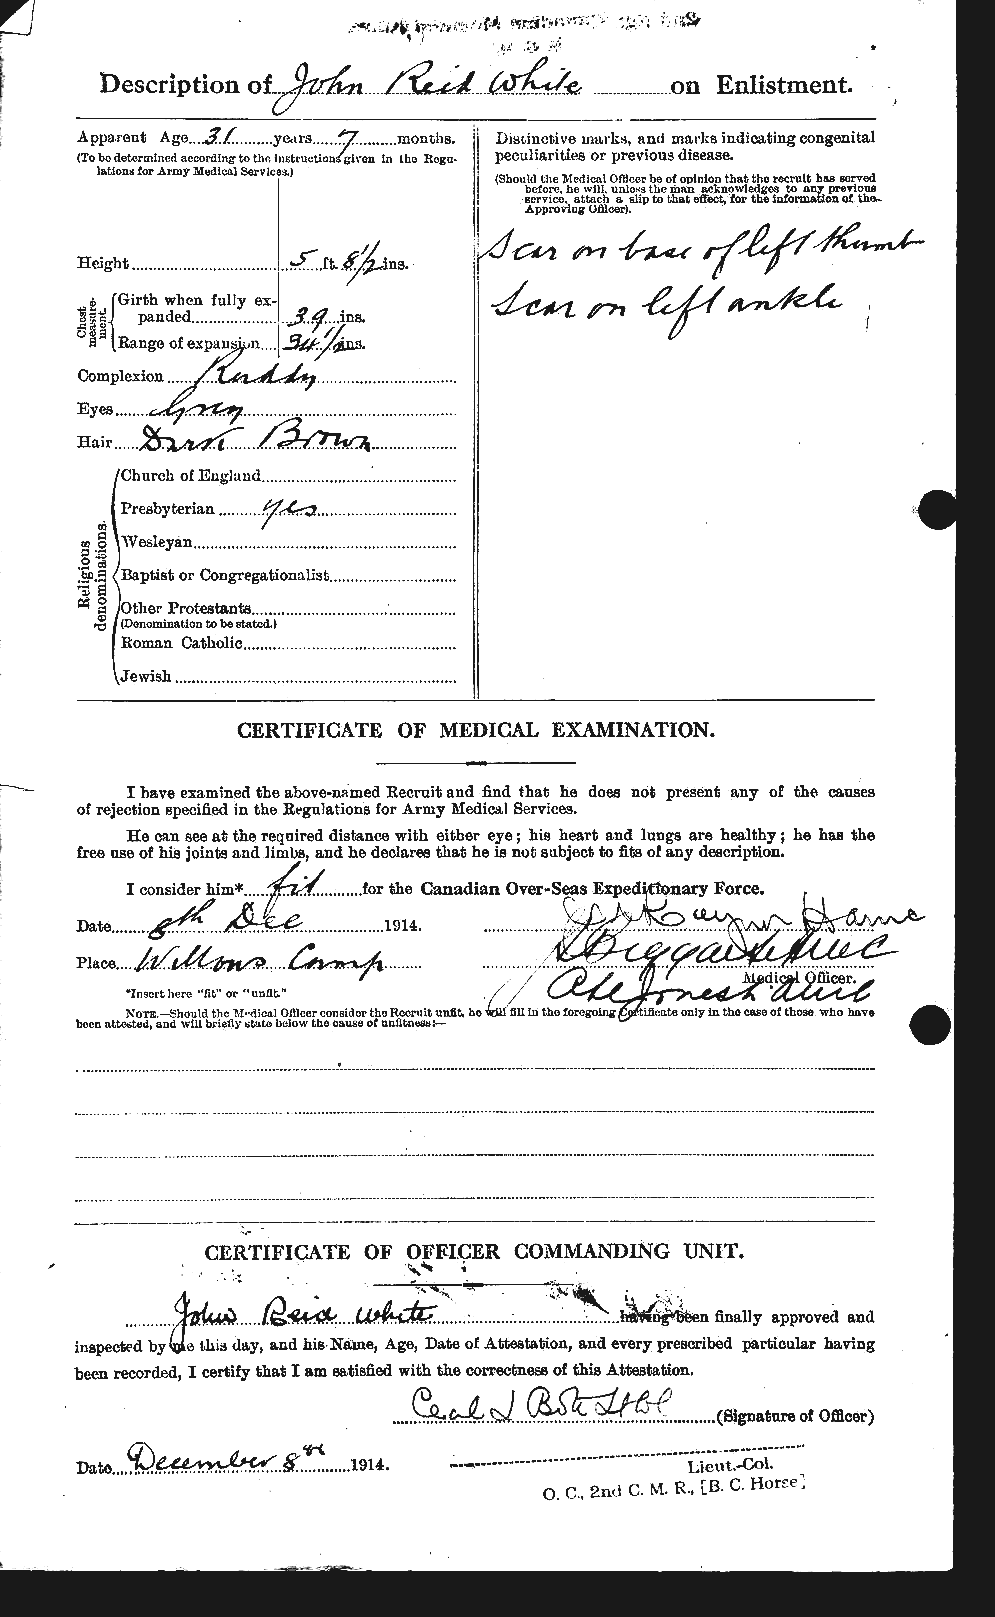 Personnel Records of the First World War - CEF 671589b